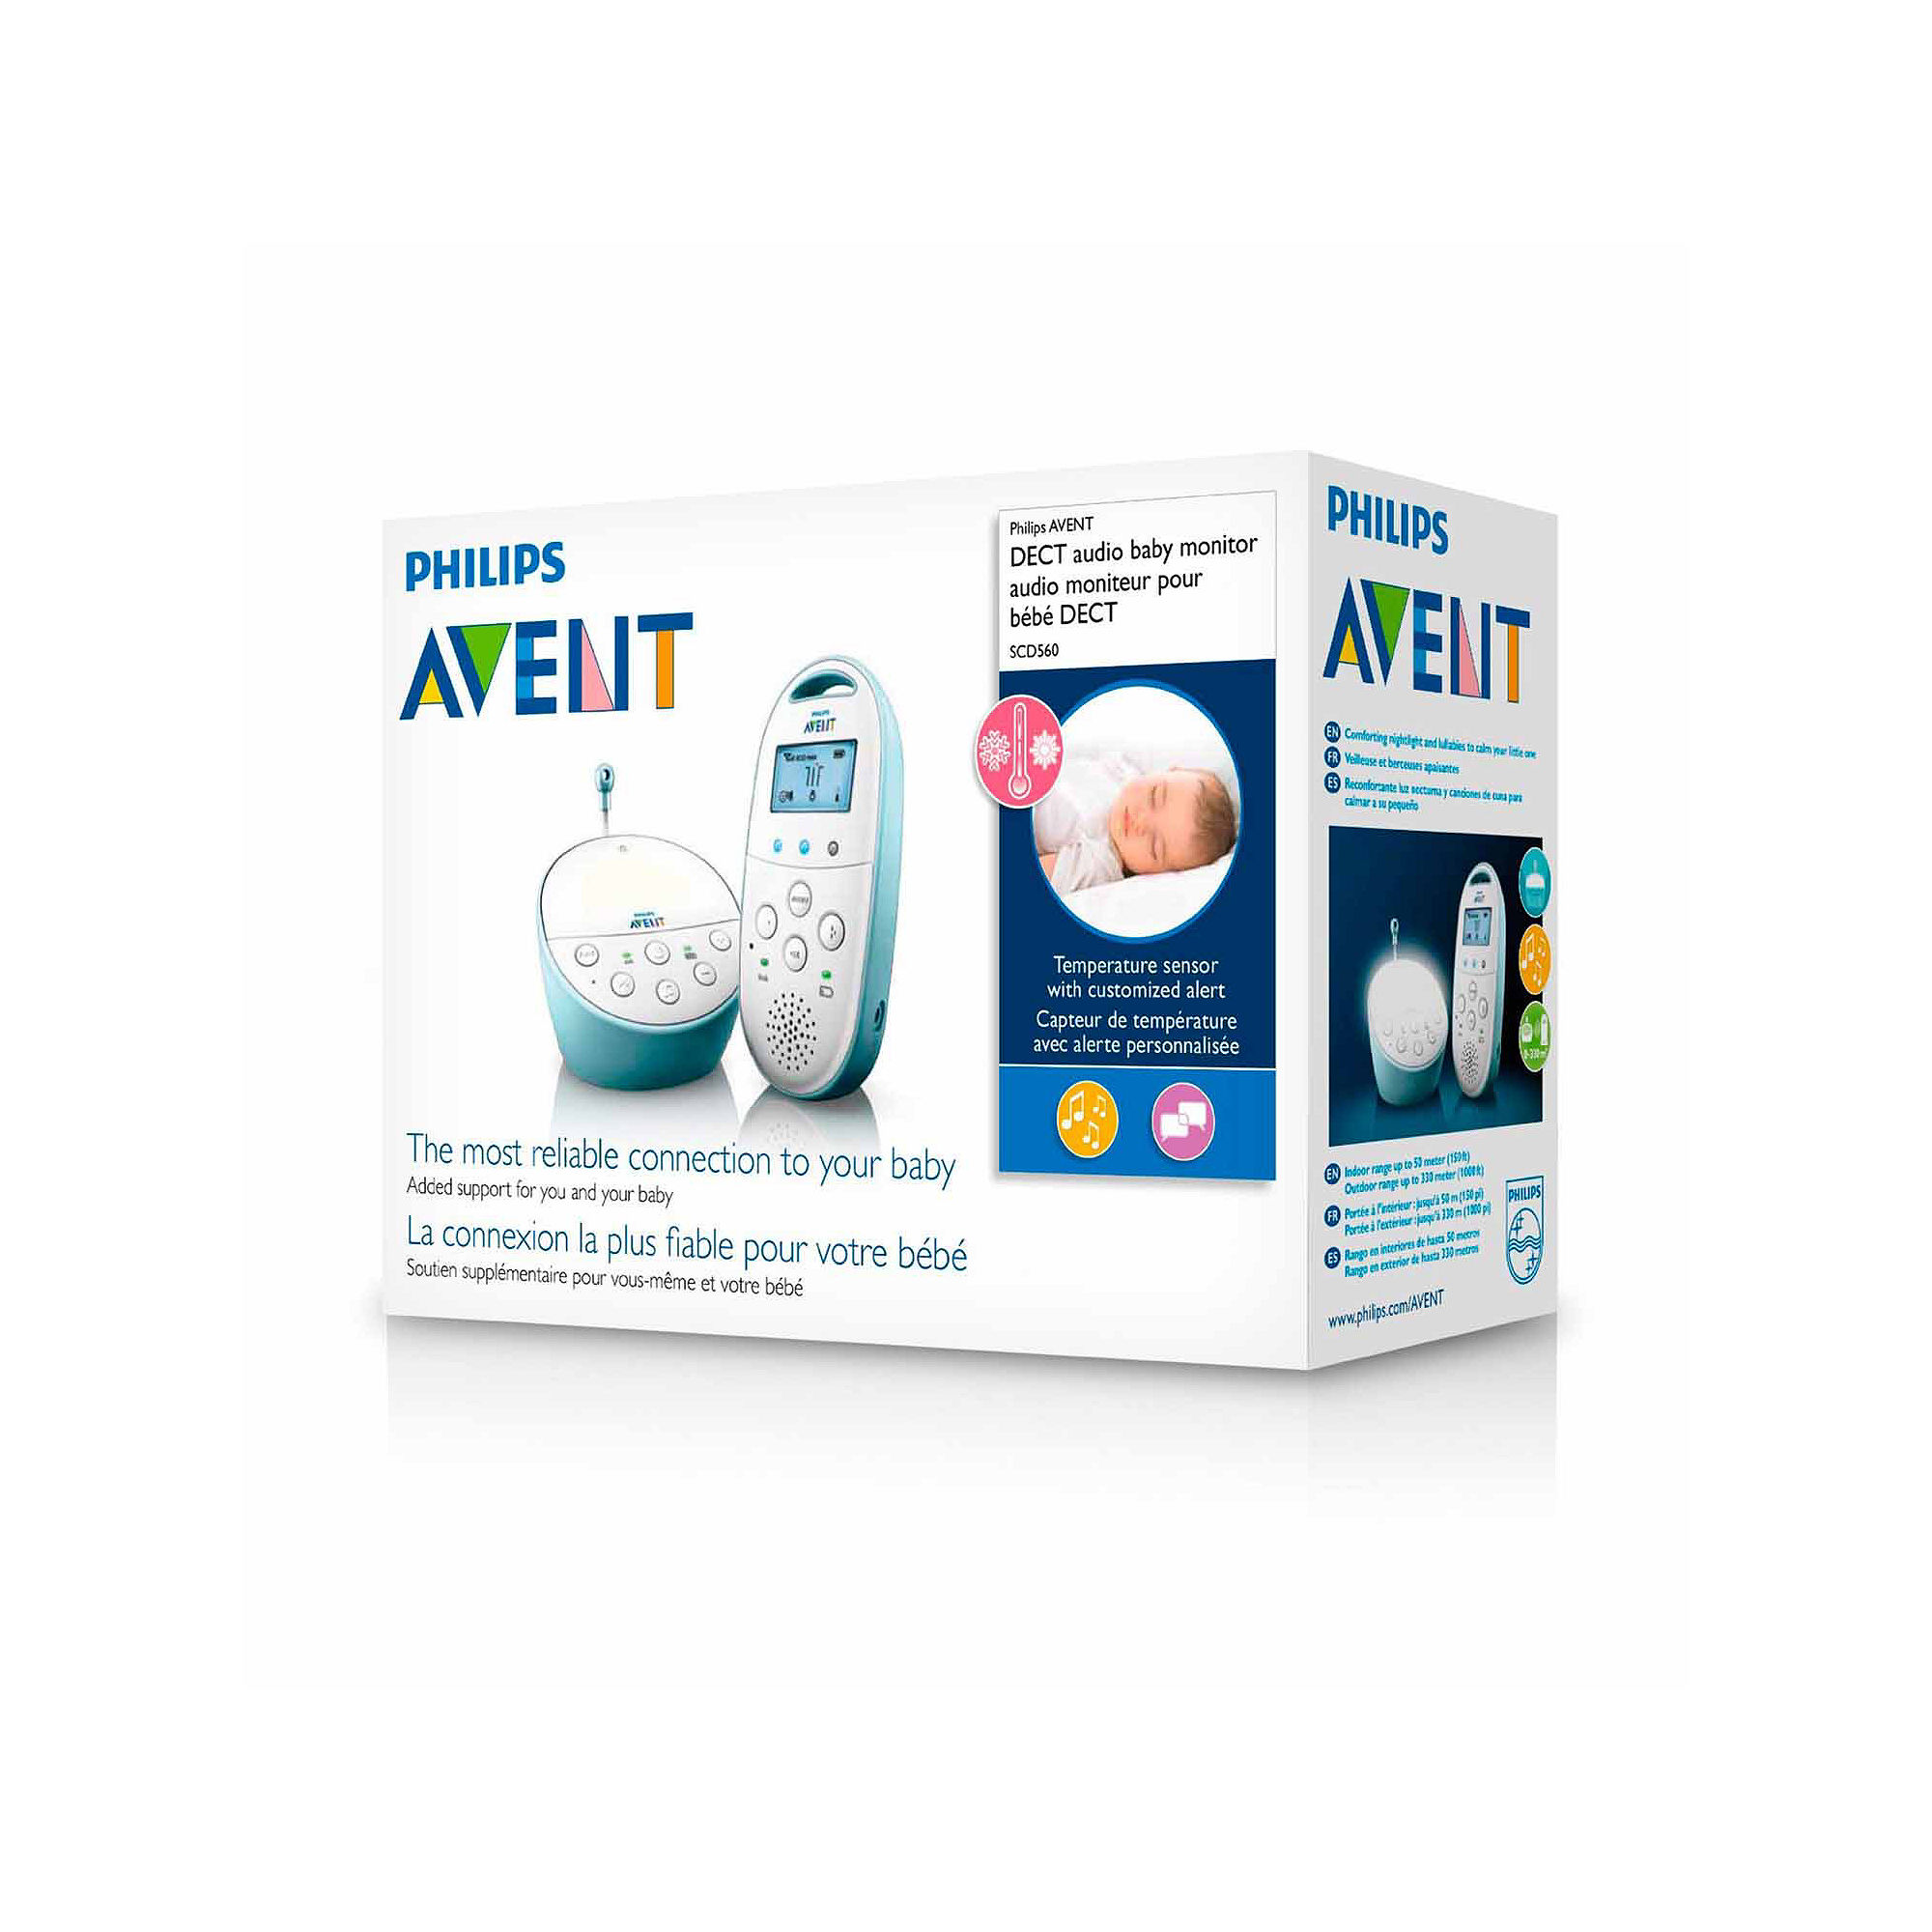 Philips Avent Dect Audio Baby Monitor SCD560/10 (Discontinued by Manufacturer) - image 2 of 4